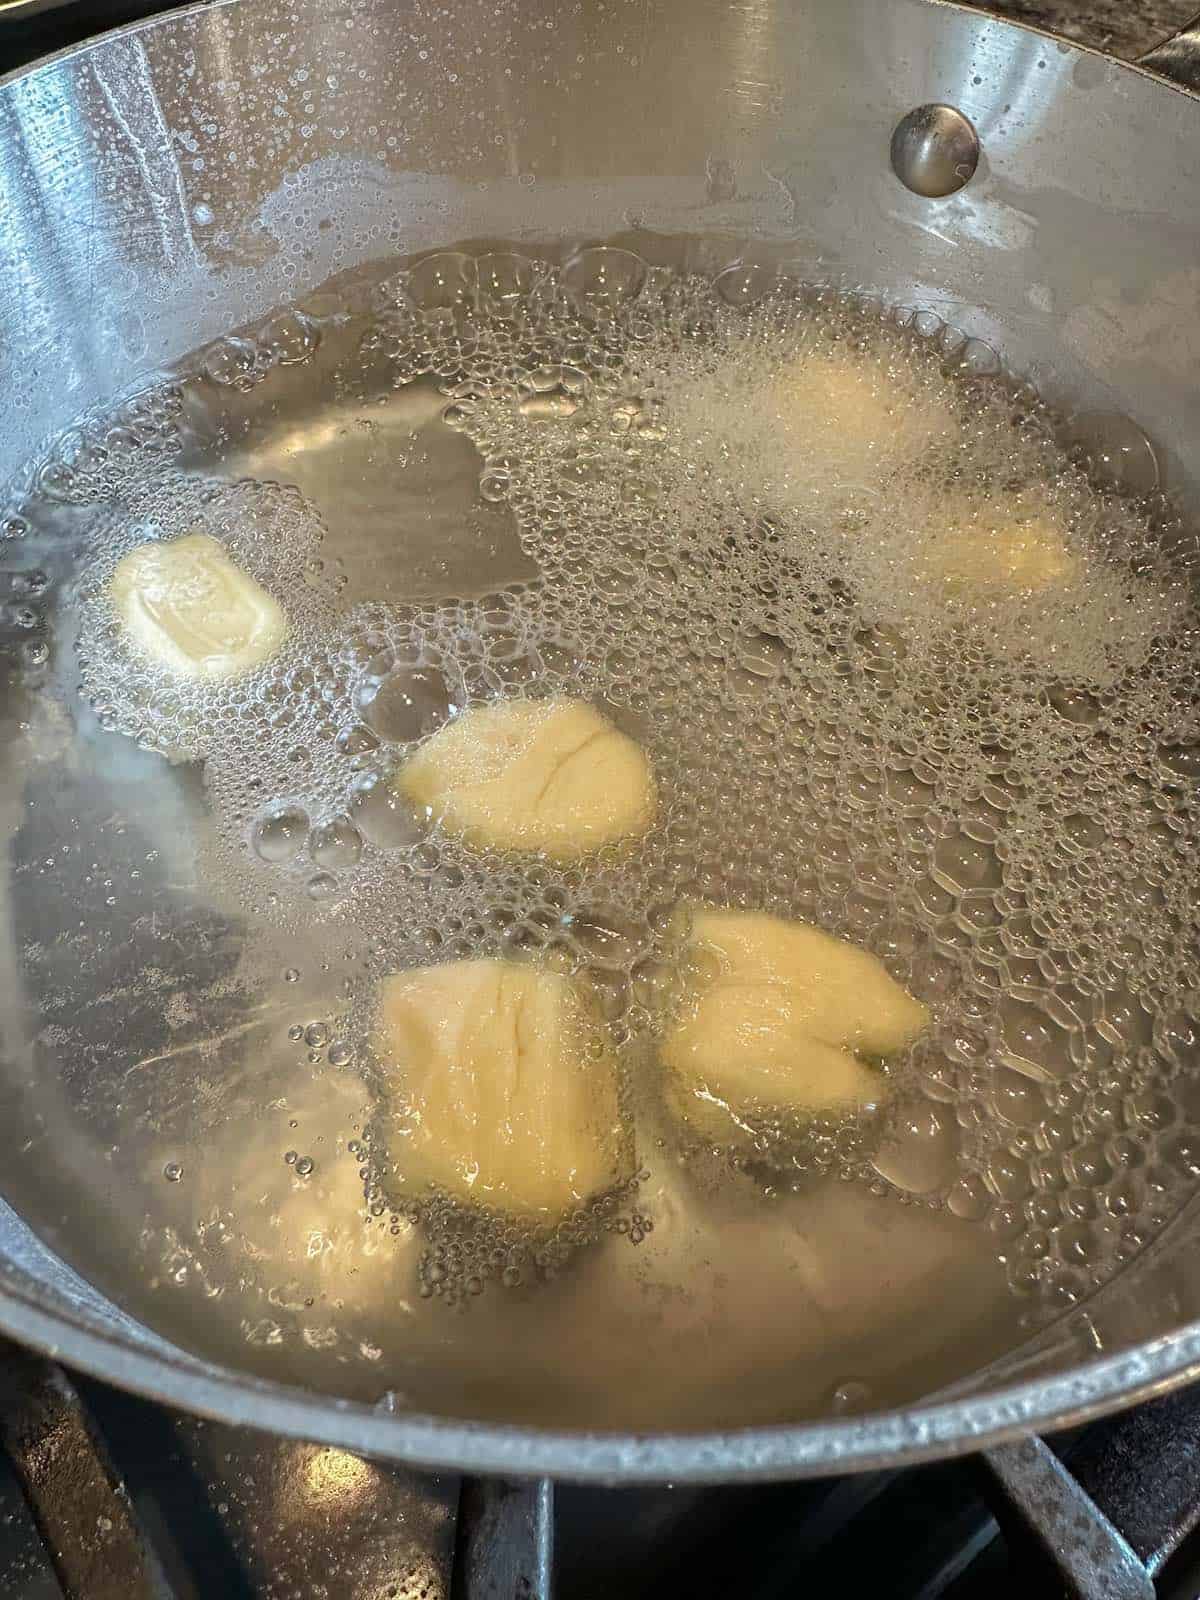 Dough bites in a pan of simmering water.